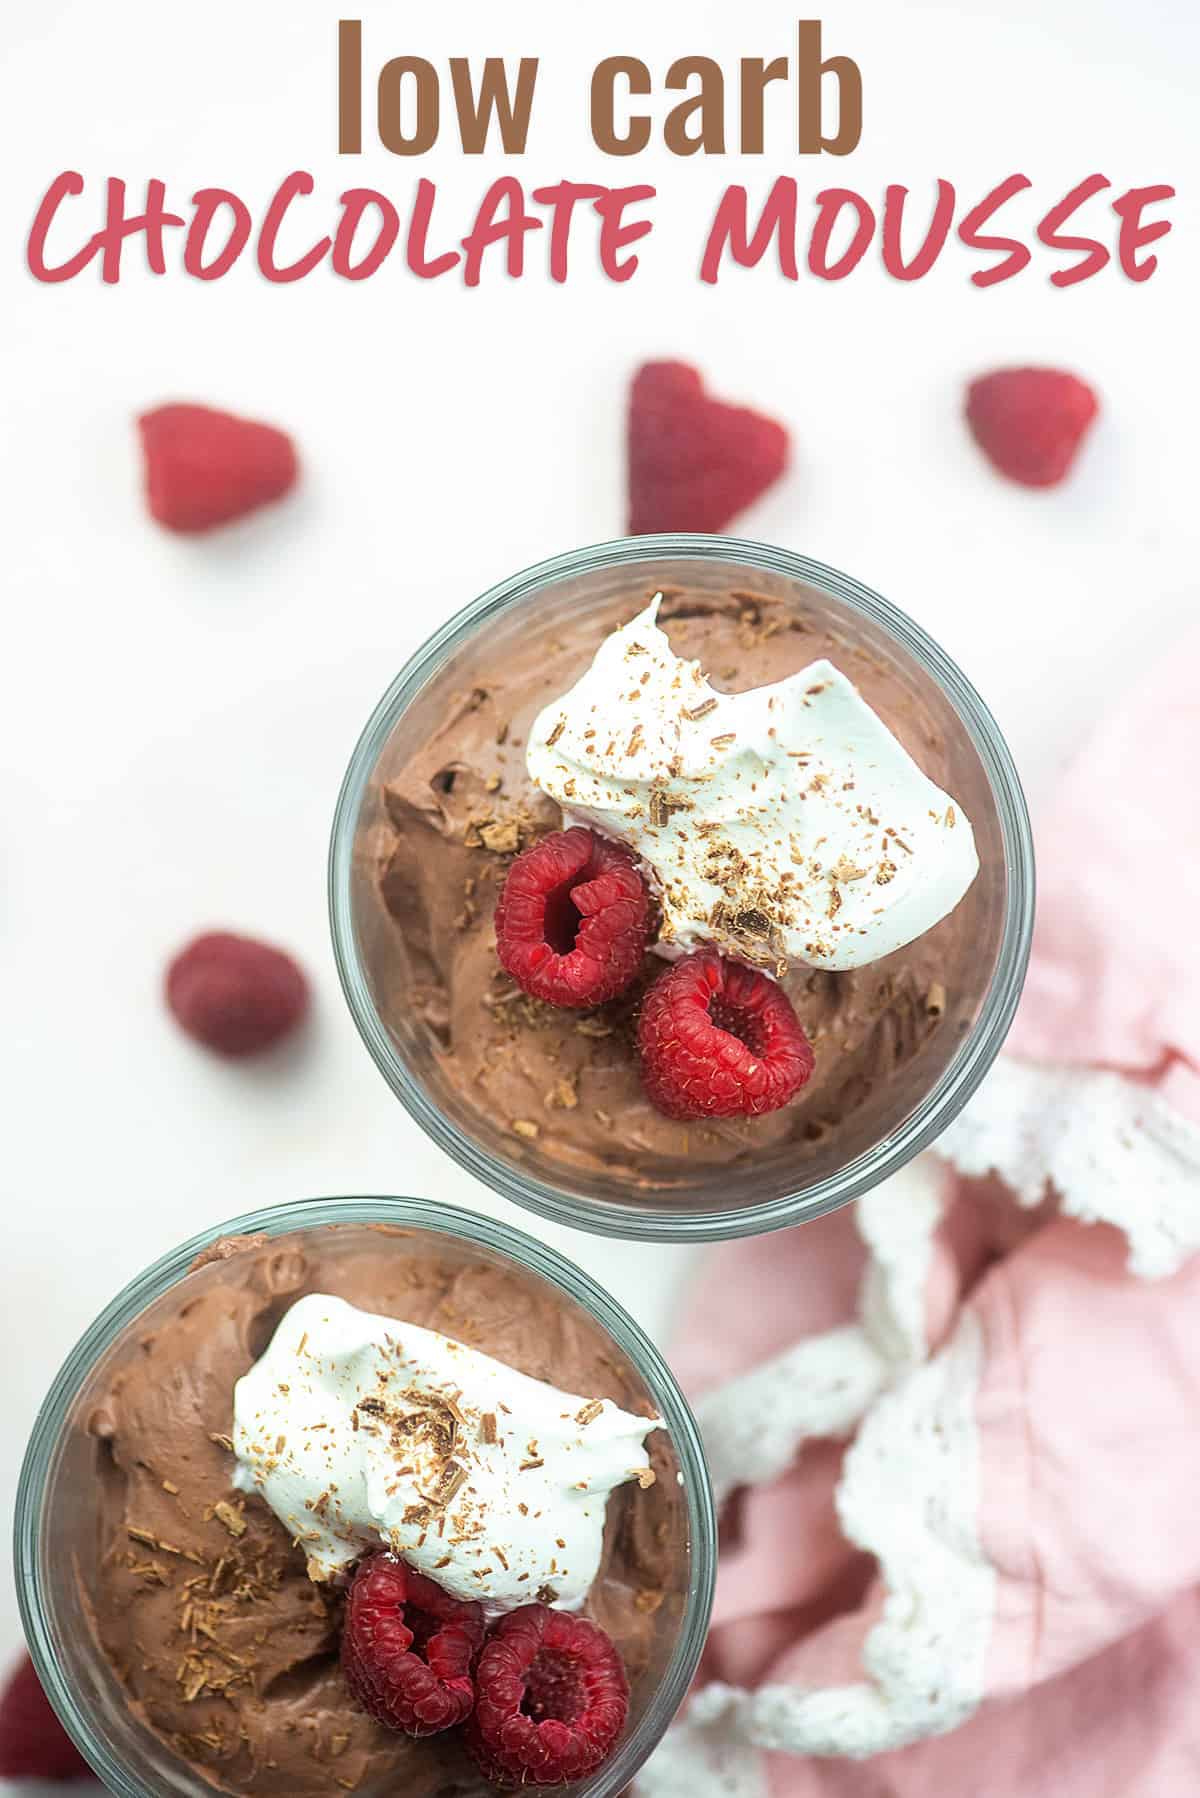 low carb chocolate mousse recipe in glass dishes with raspberries